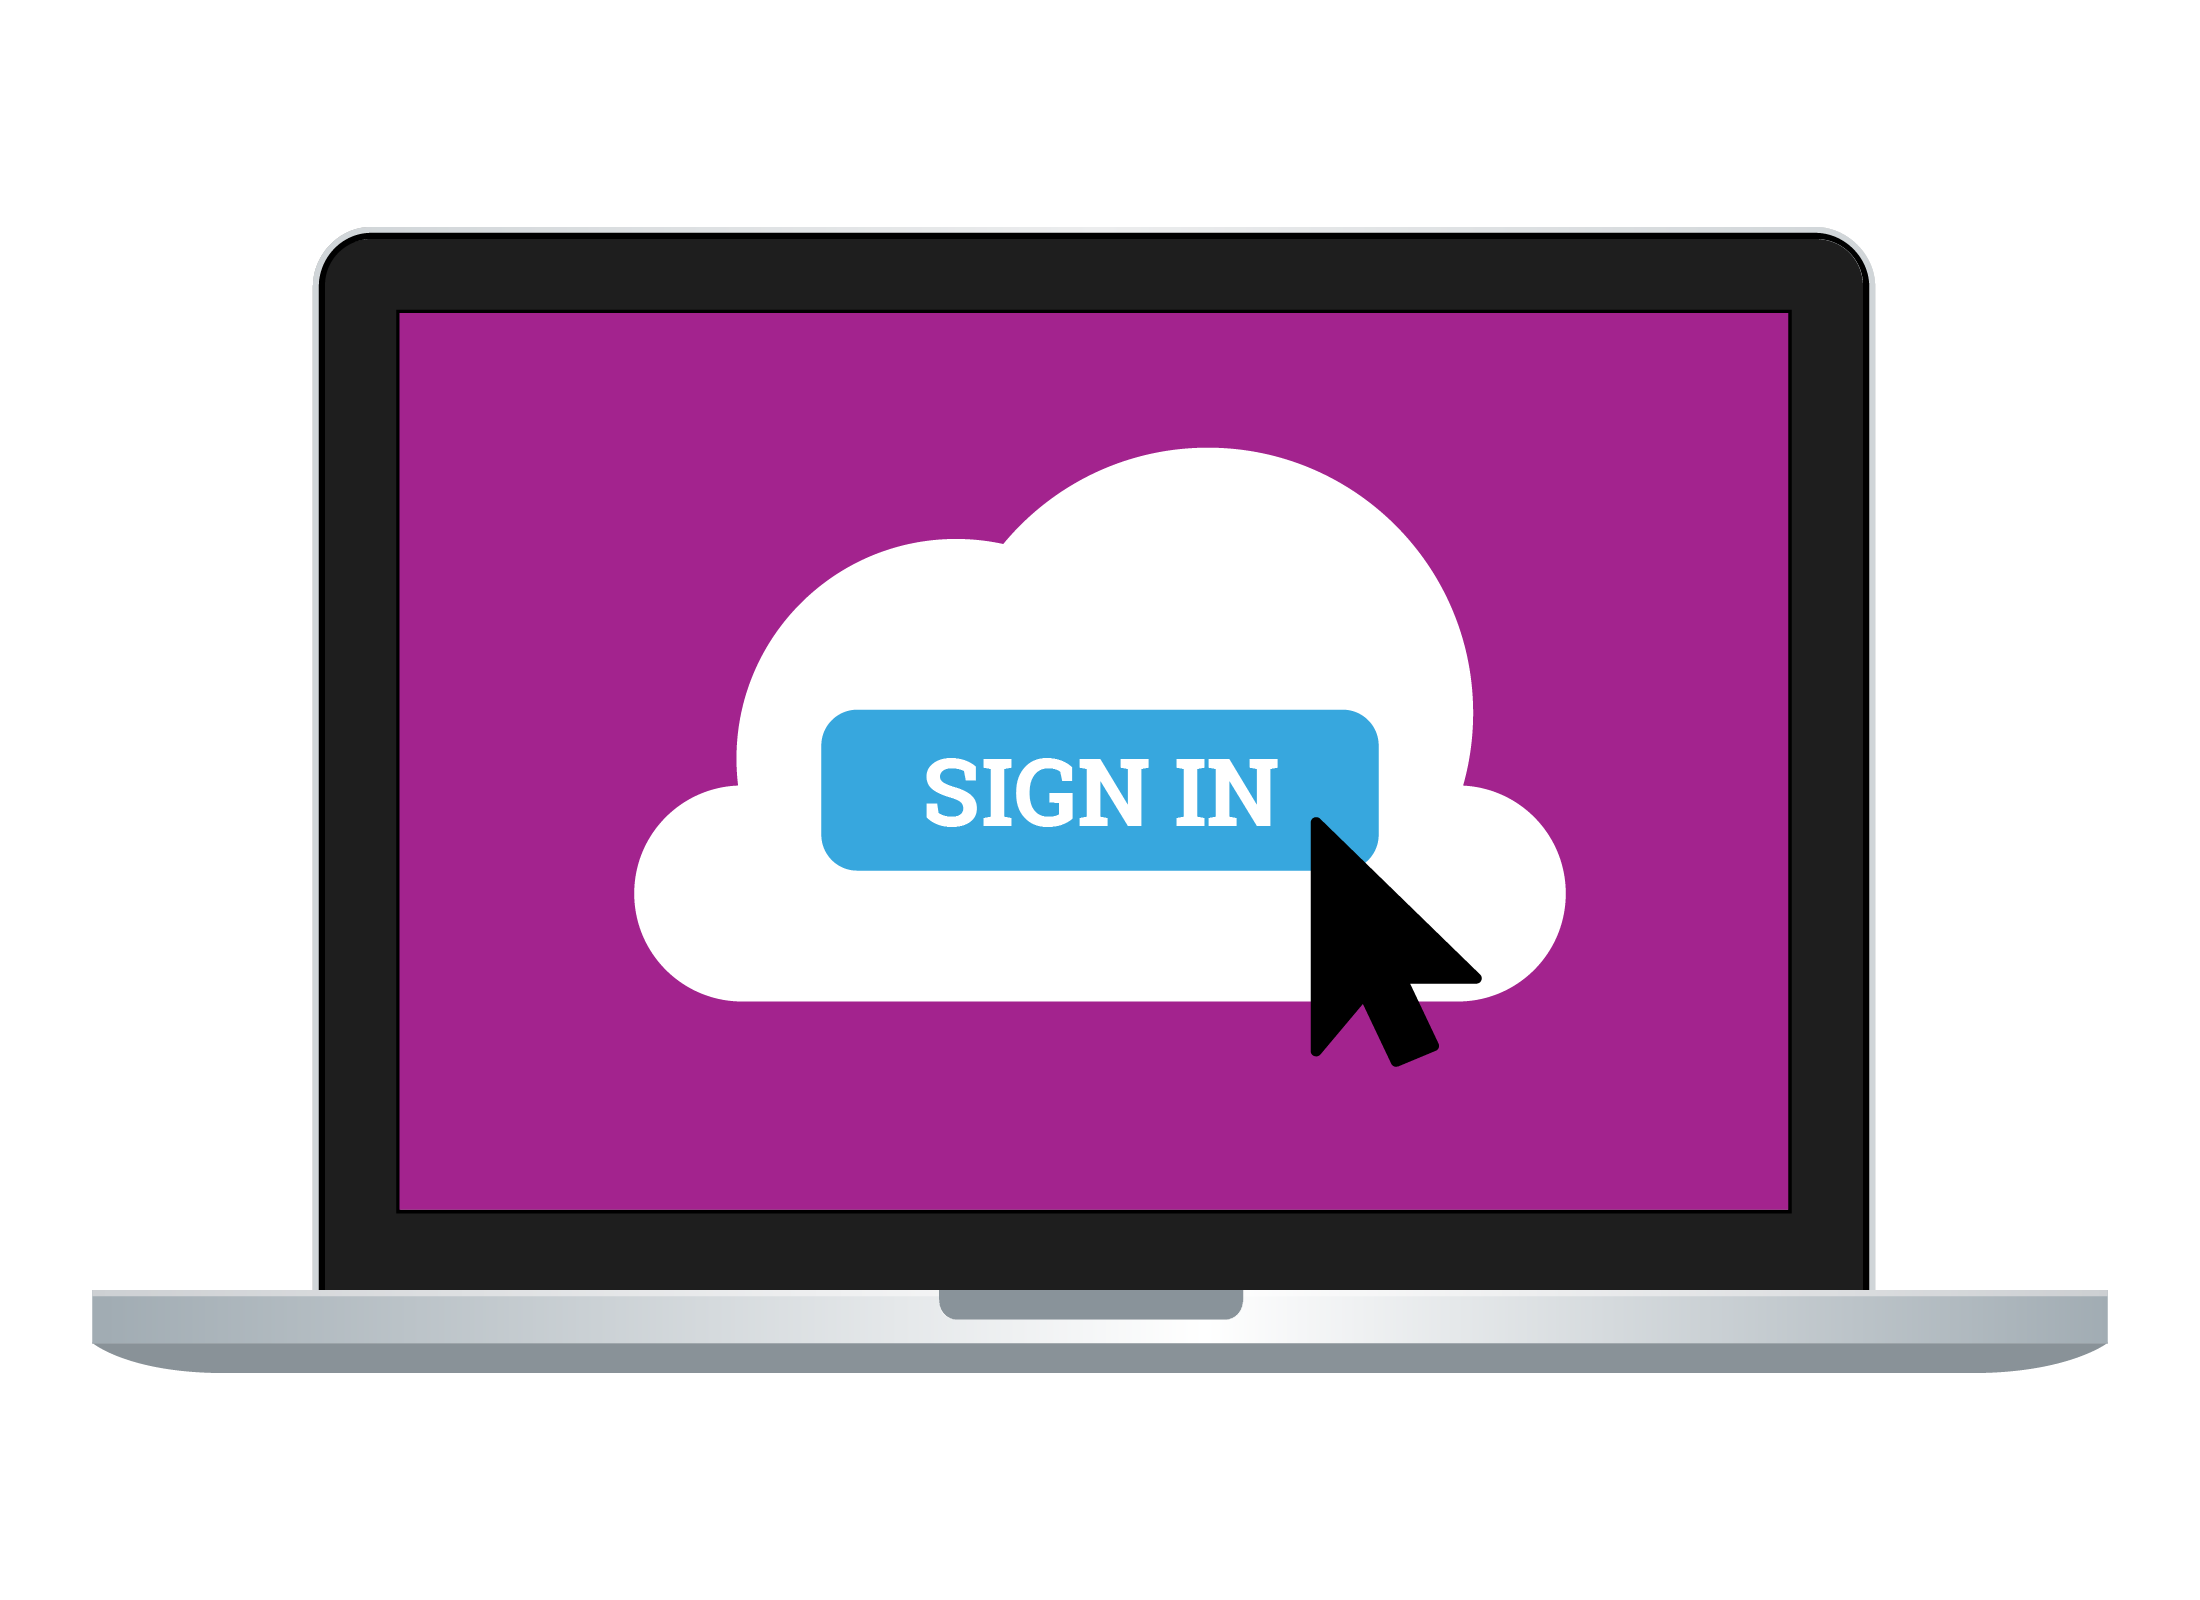 Sign in to use cloud apps